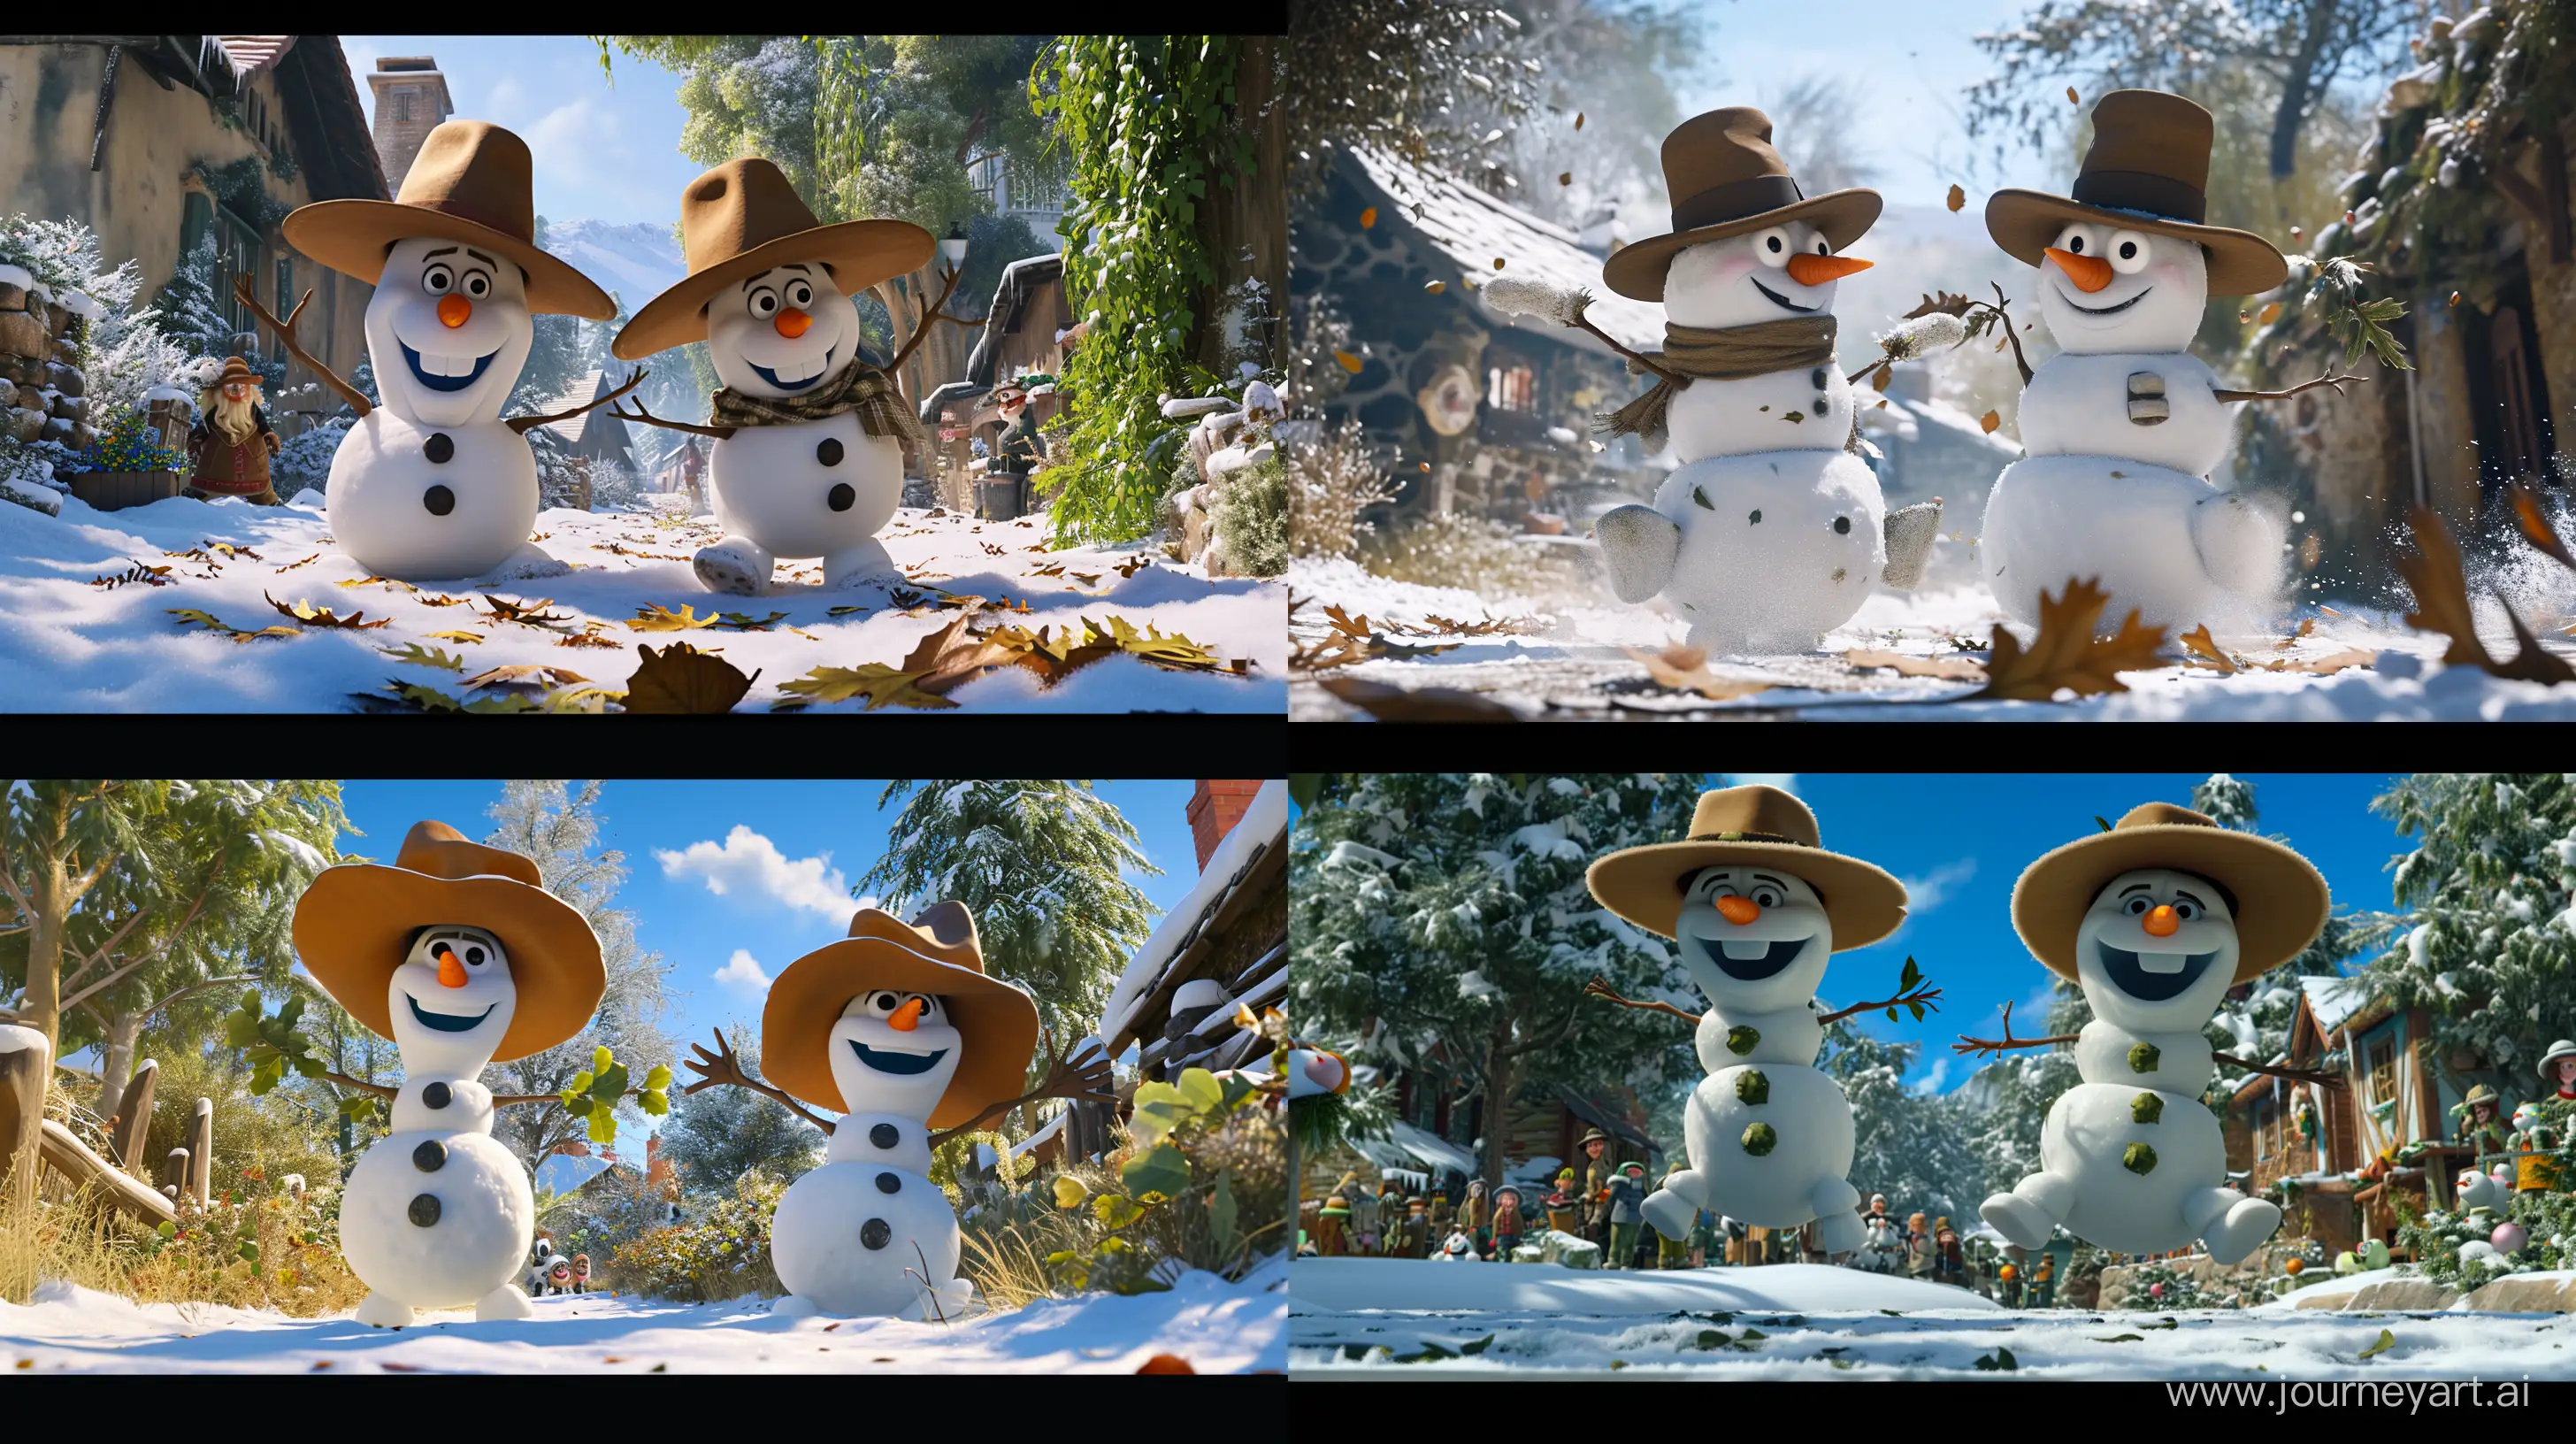 two snowmen named Robert the Great and Tiny Tim wearing broad-brimmed hats, set in a small, secluded village where the snow never melts, performing thrilling action moves like jumping over snowy hills, surrounded by durable winter trees that produce magical leaves used for healing bandages that prevent them from melting, the villagers gathering around showing love and protection for their forest, essence of friendship and magic rekindling through the community --ar 16:9